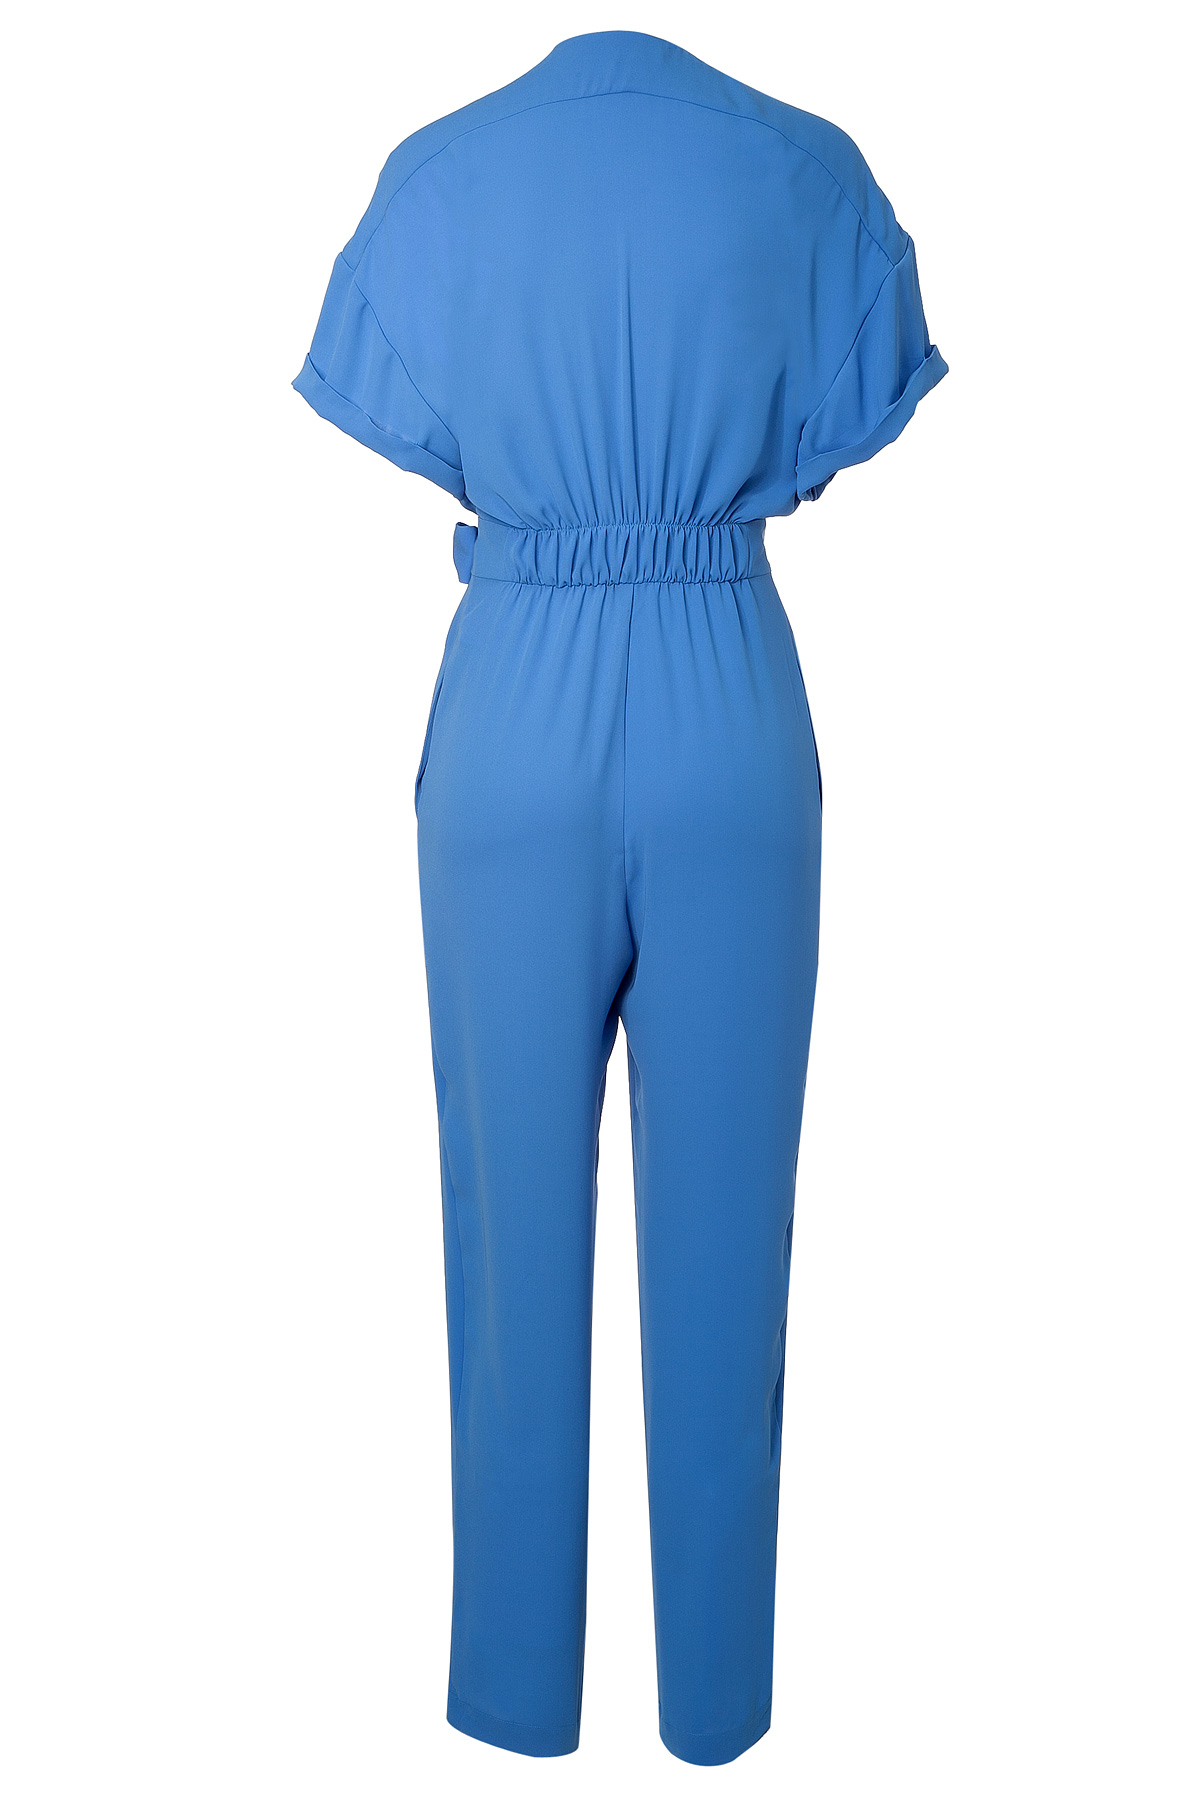 Lyst - Kenzo Belted Jumpsuit in Blue